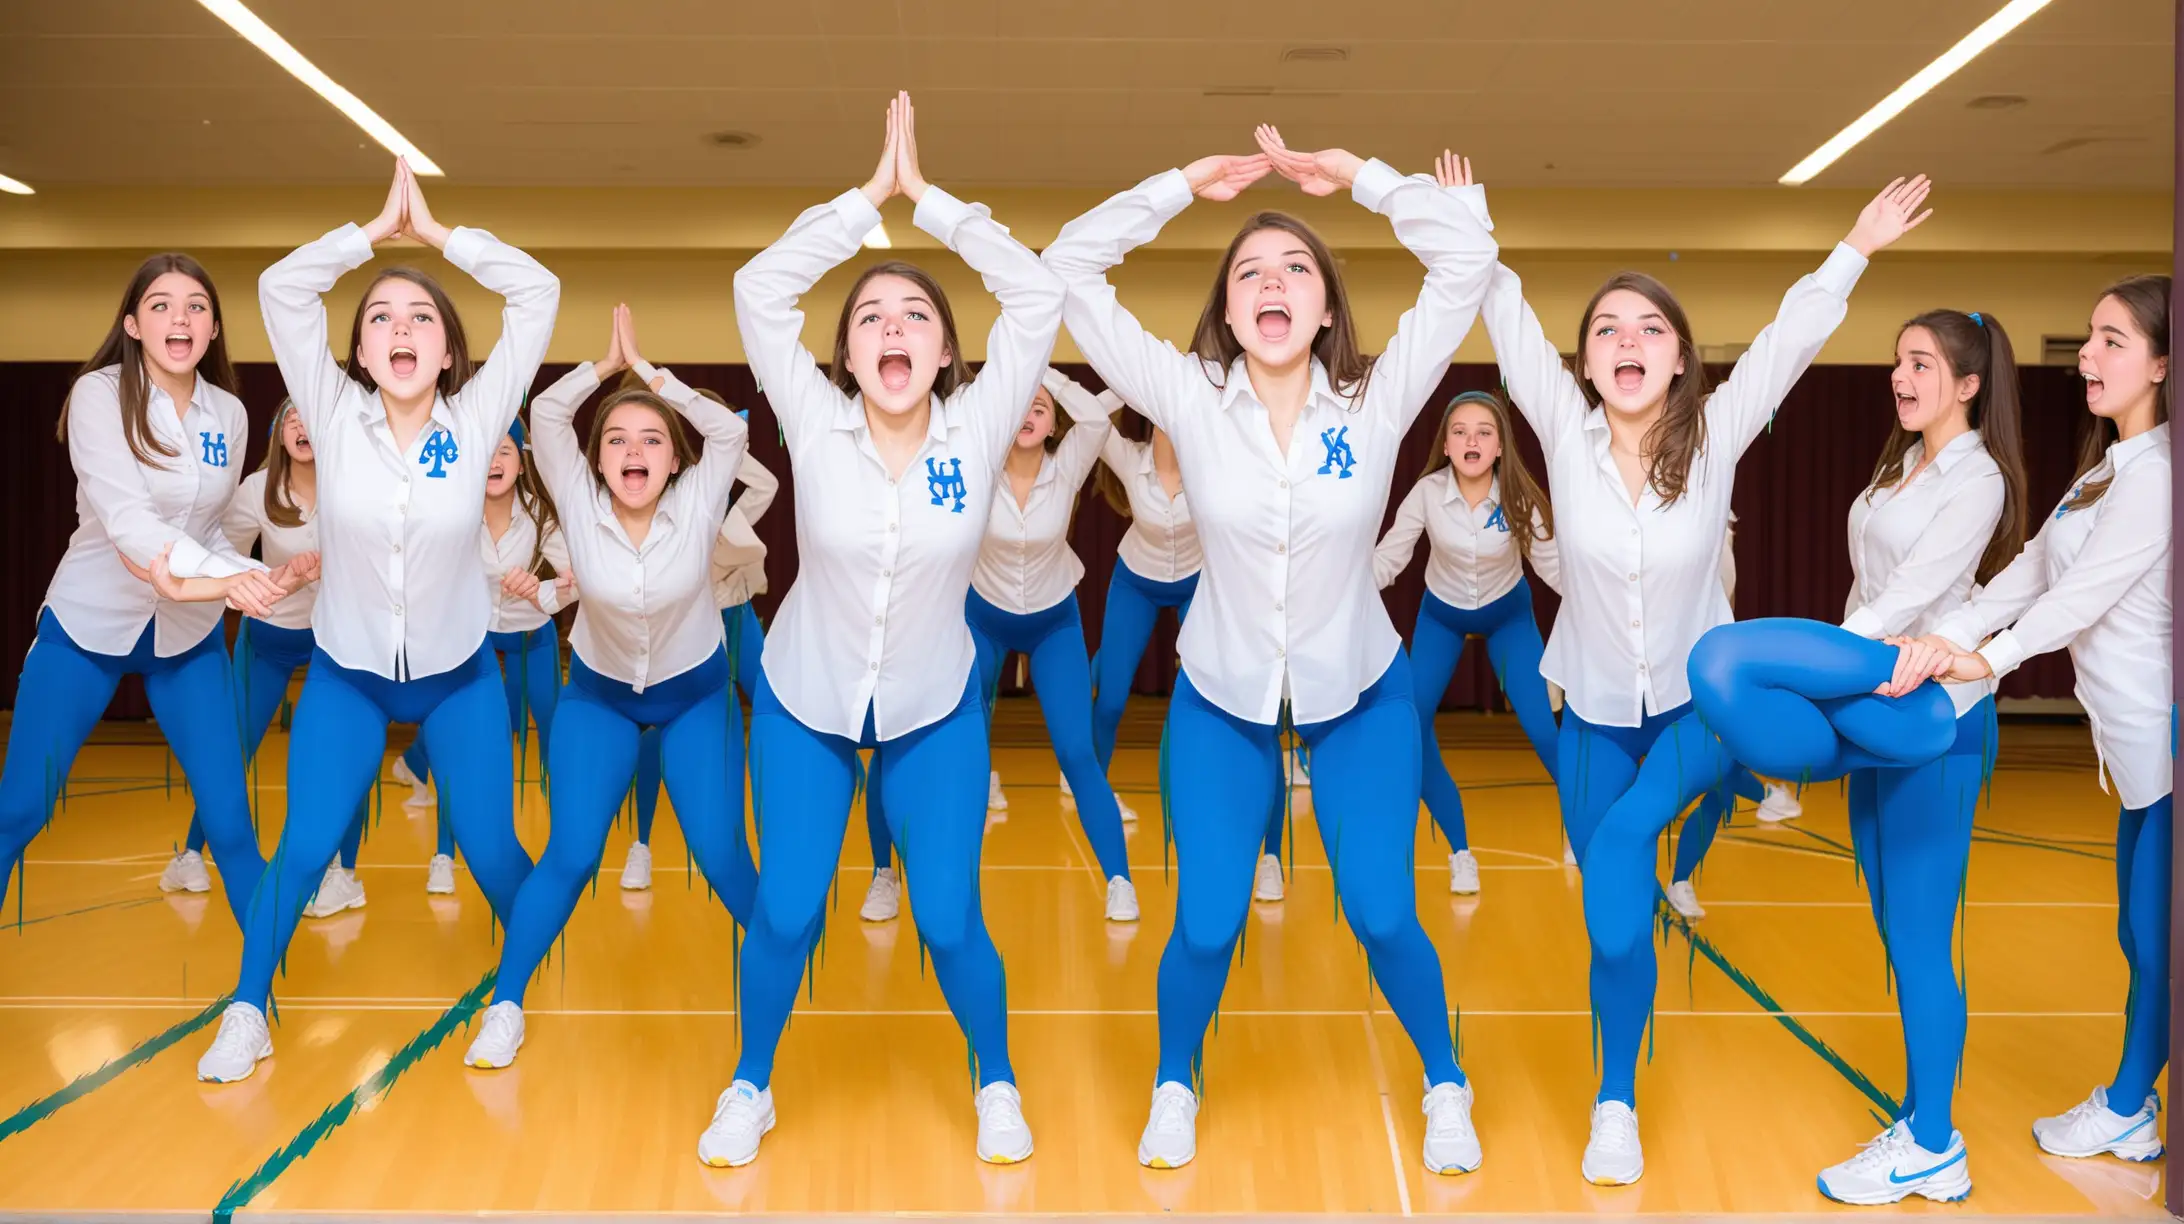 College Women Performing Overhead Squats in White Shirts and Blue Tights